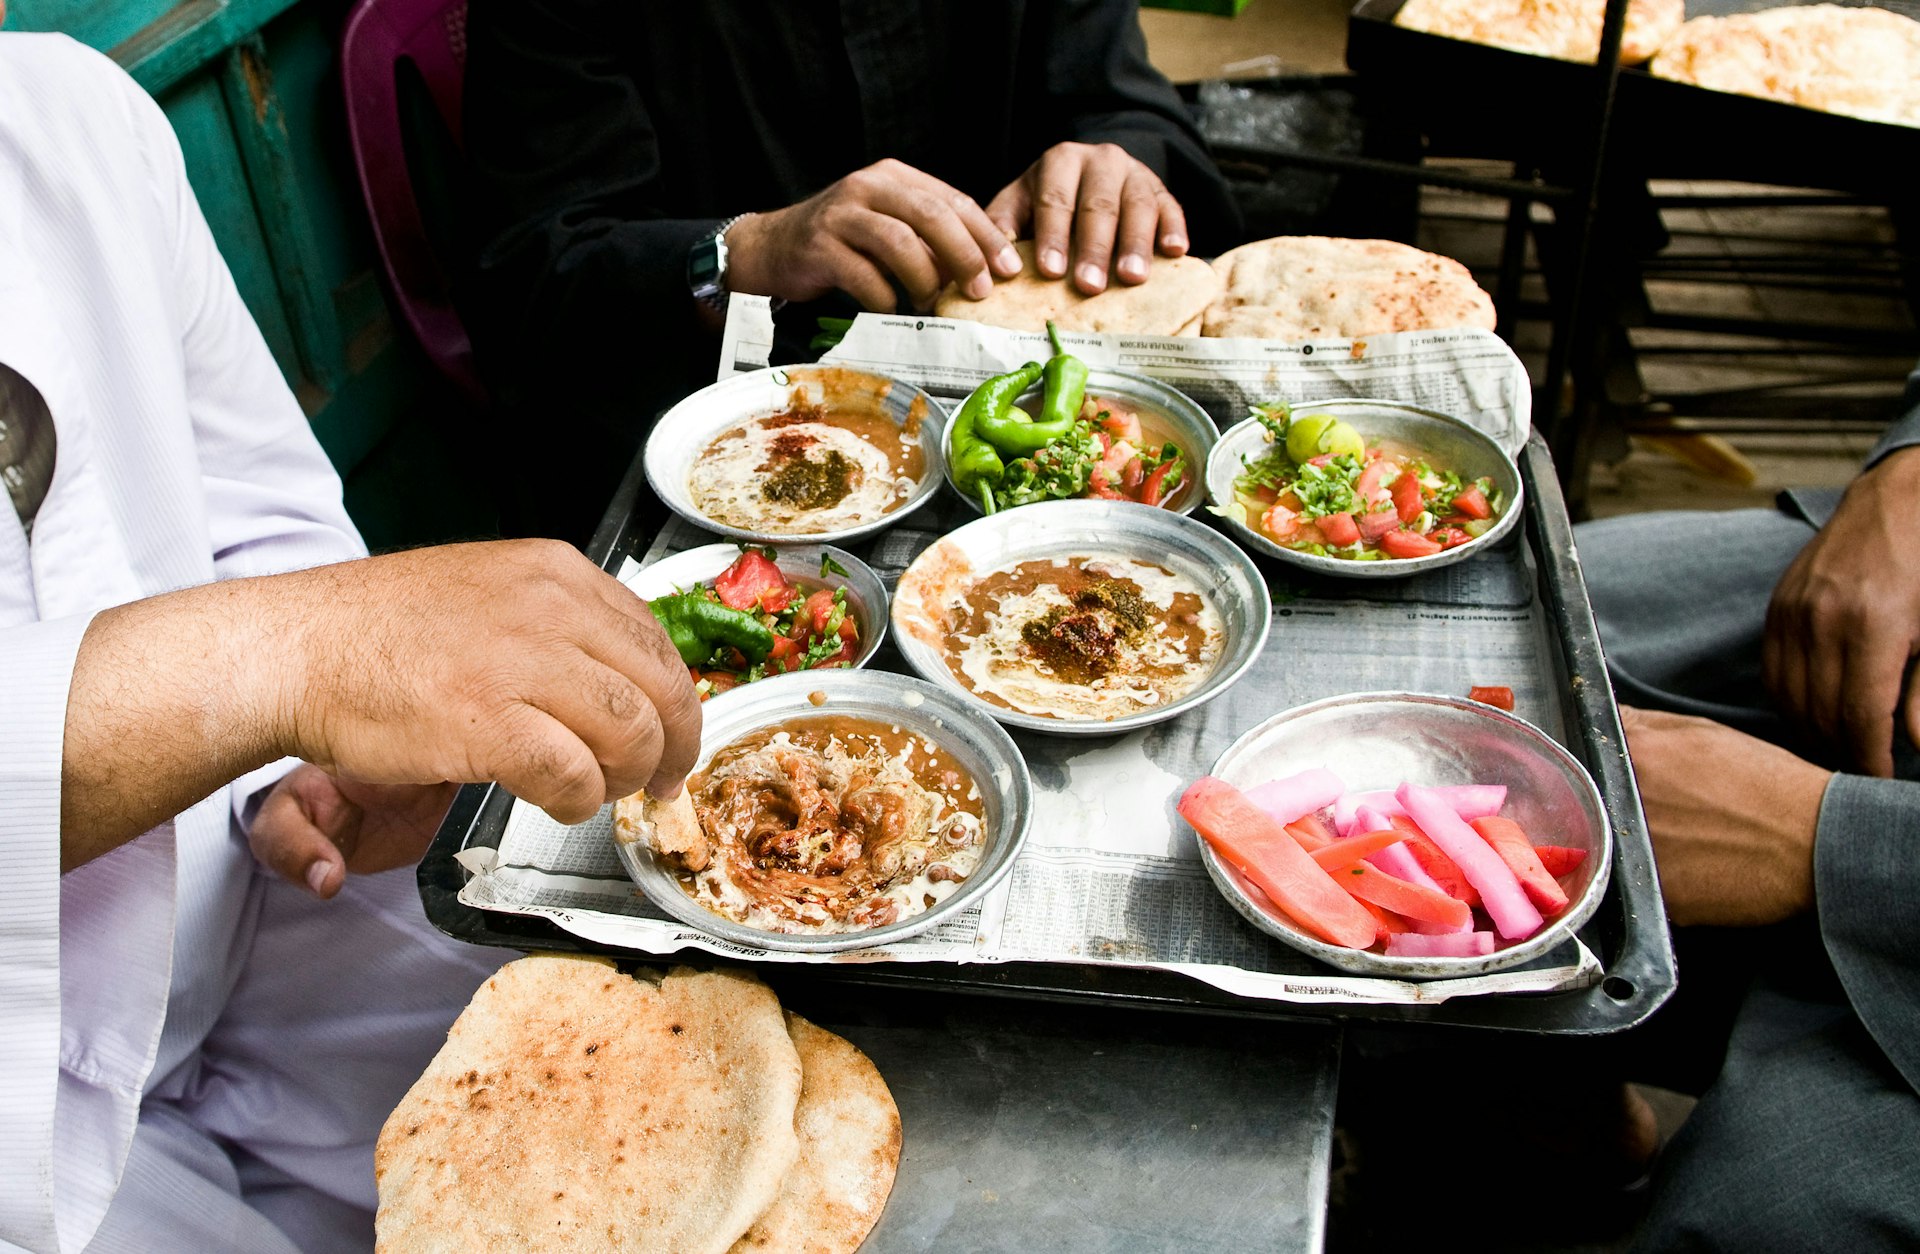 People in Egypt passing a tray with several dishes, including fuul medames